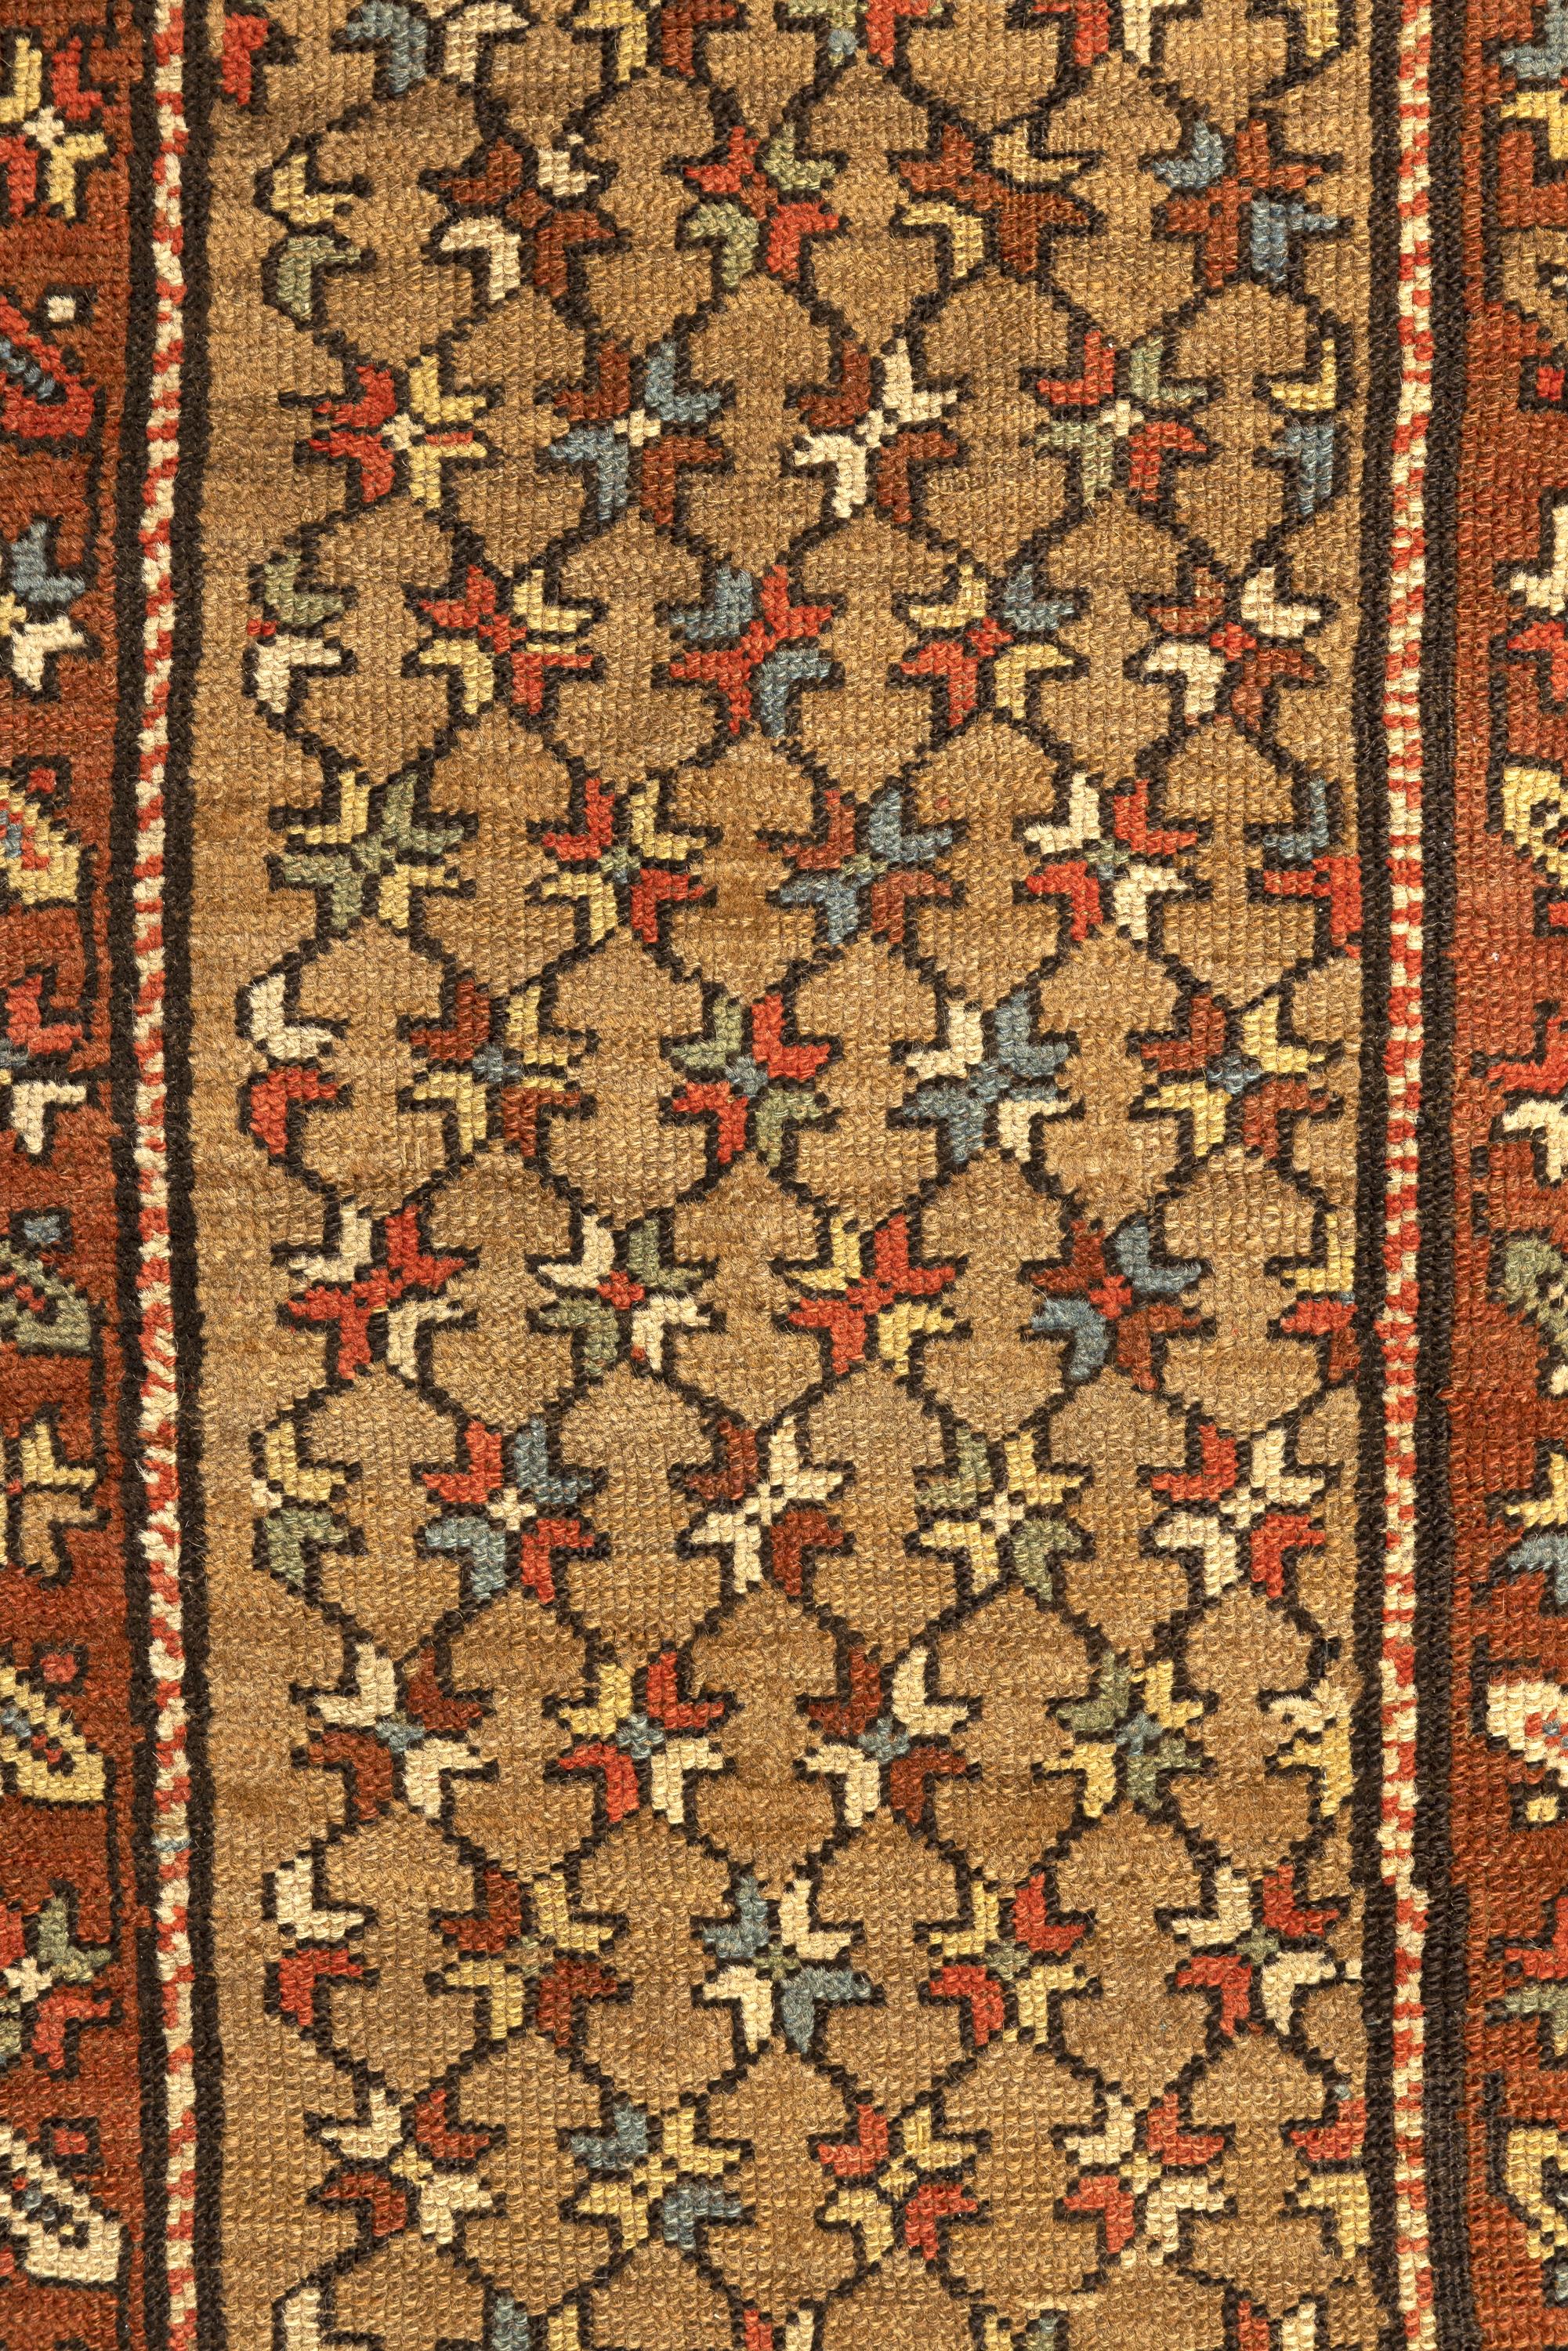 Lori – West Persia

This is an excellent antique Persian Lori made with artistic mastery. It features an all-over pattern of colourful flowers intertwined in a dark beige shade throughout its central field. It is surrounded by three beautiful rust,